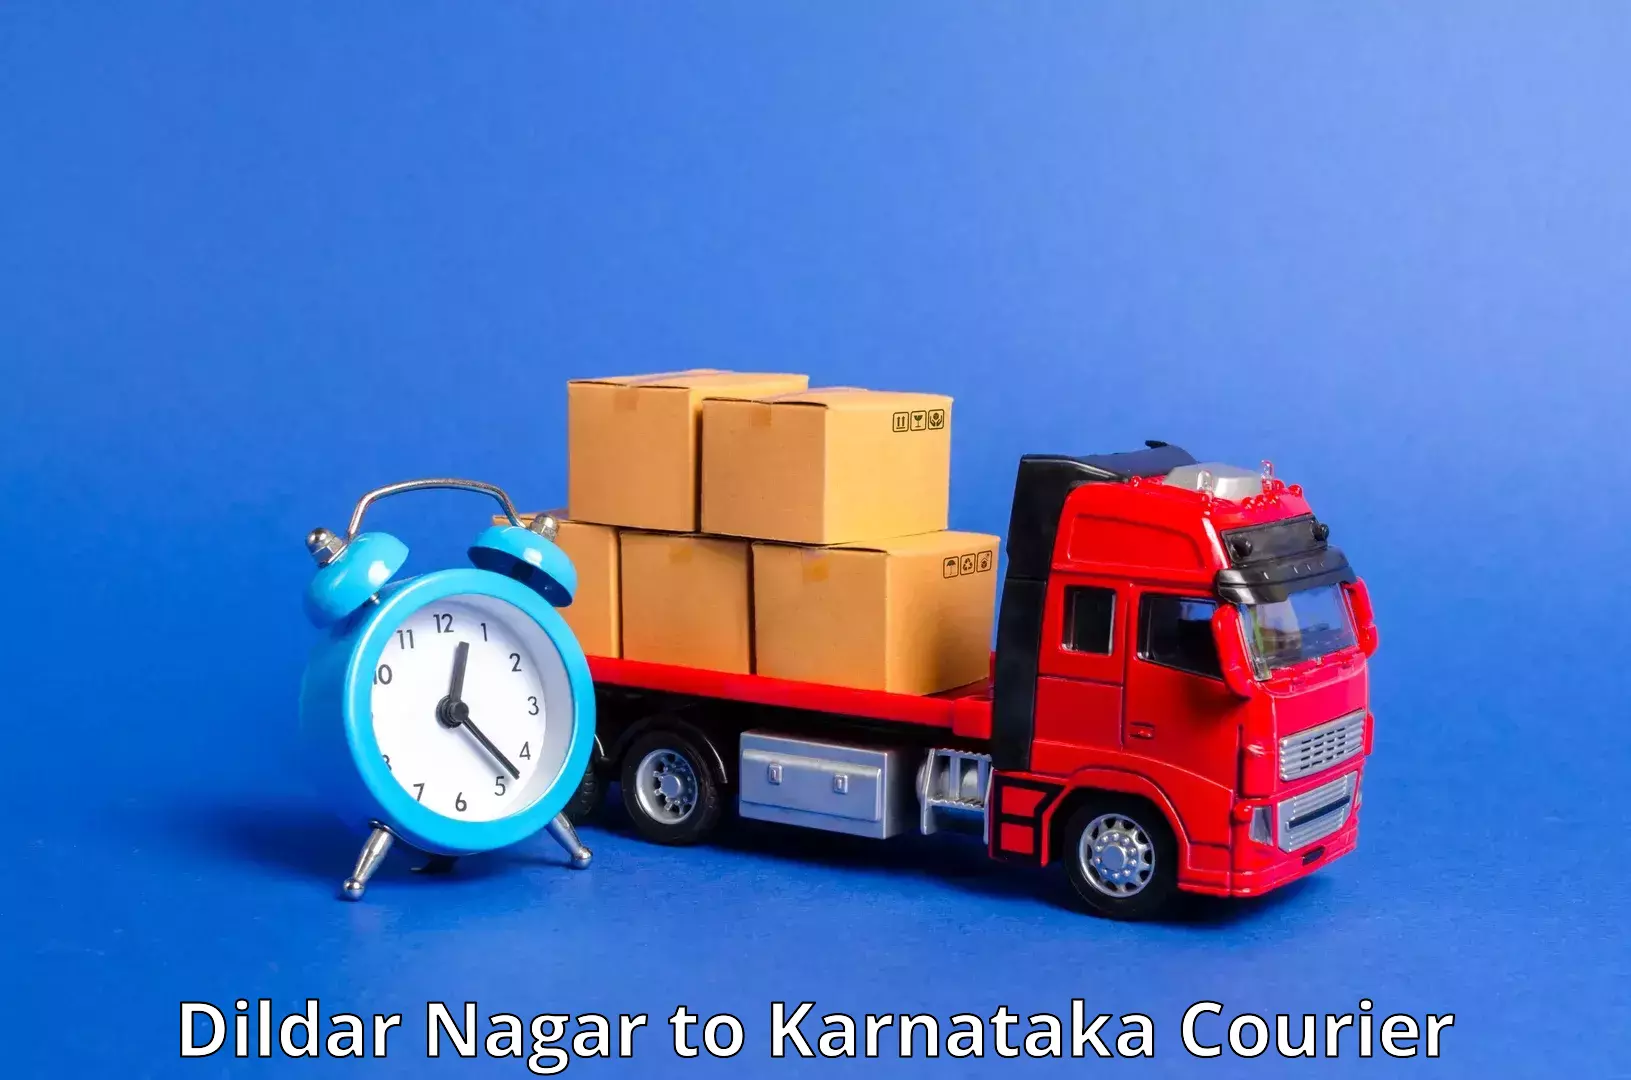 Personal parcel delivery Dildar Nagar to Bangalore